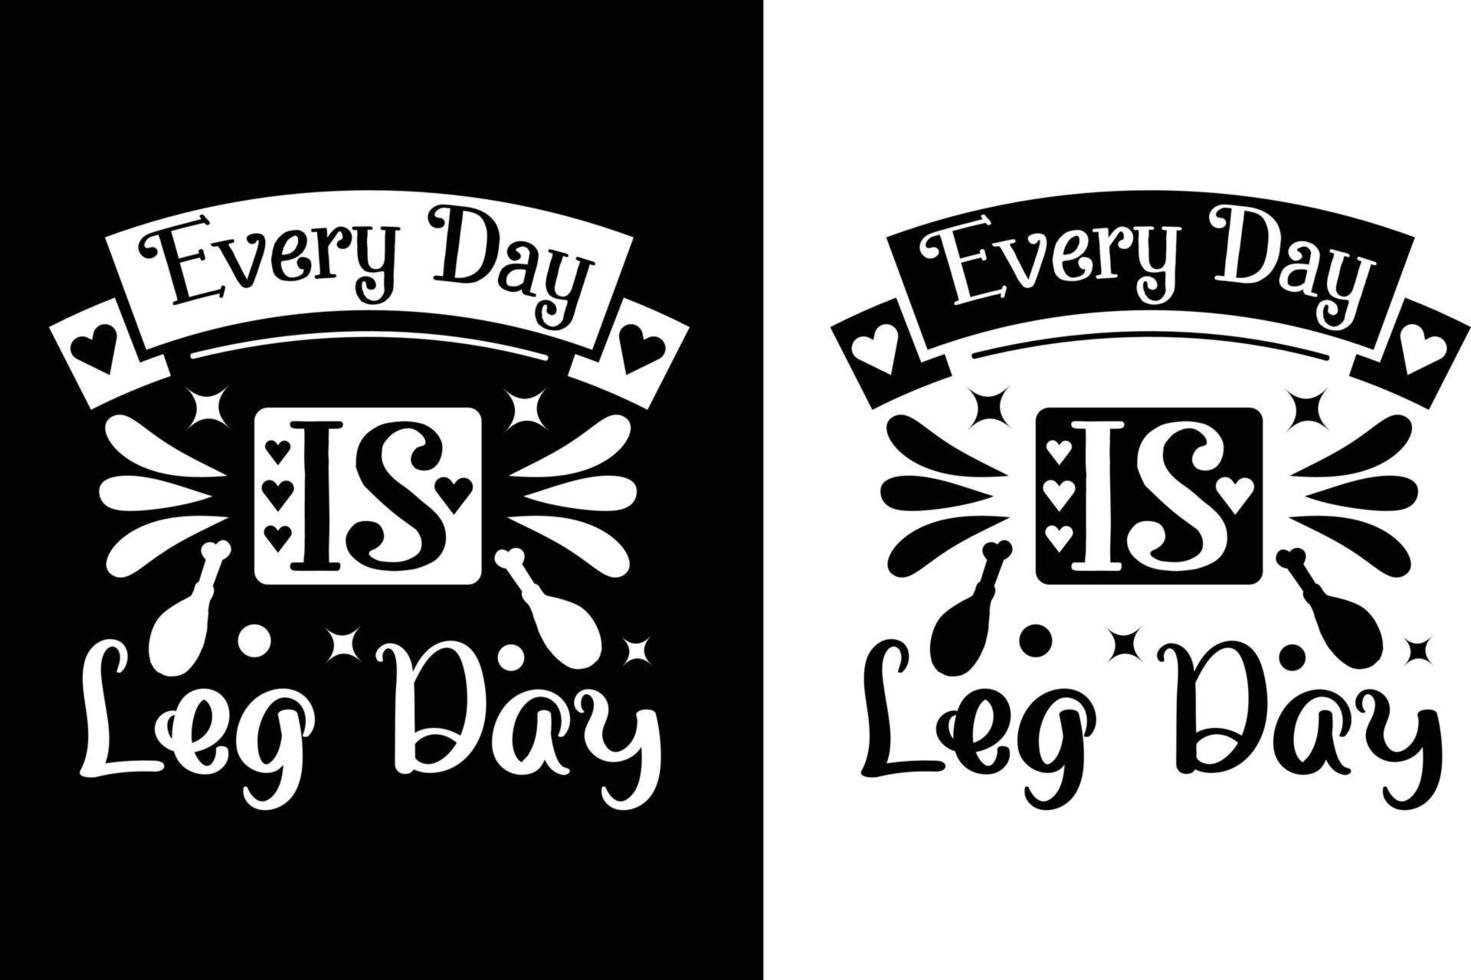 Every day is leg day t shirt design vector